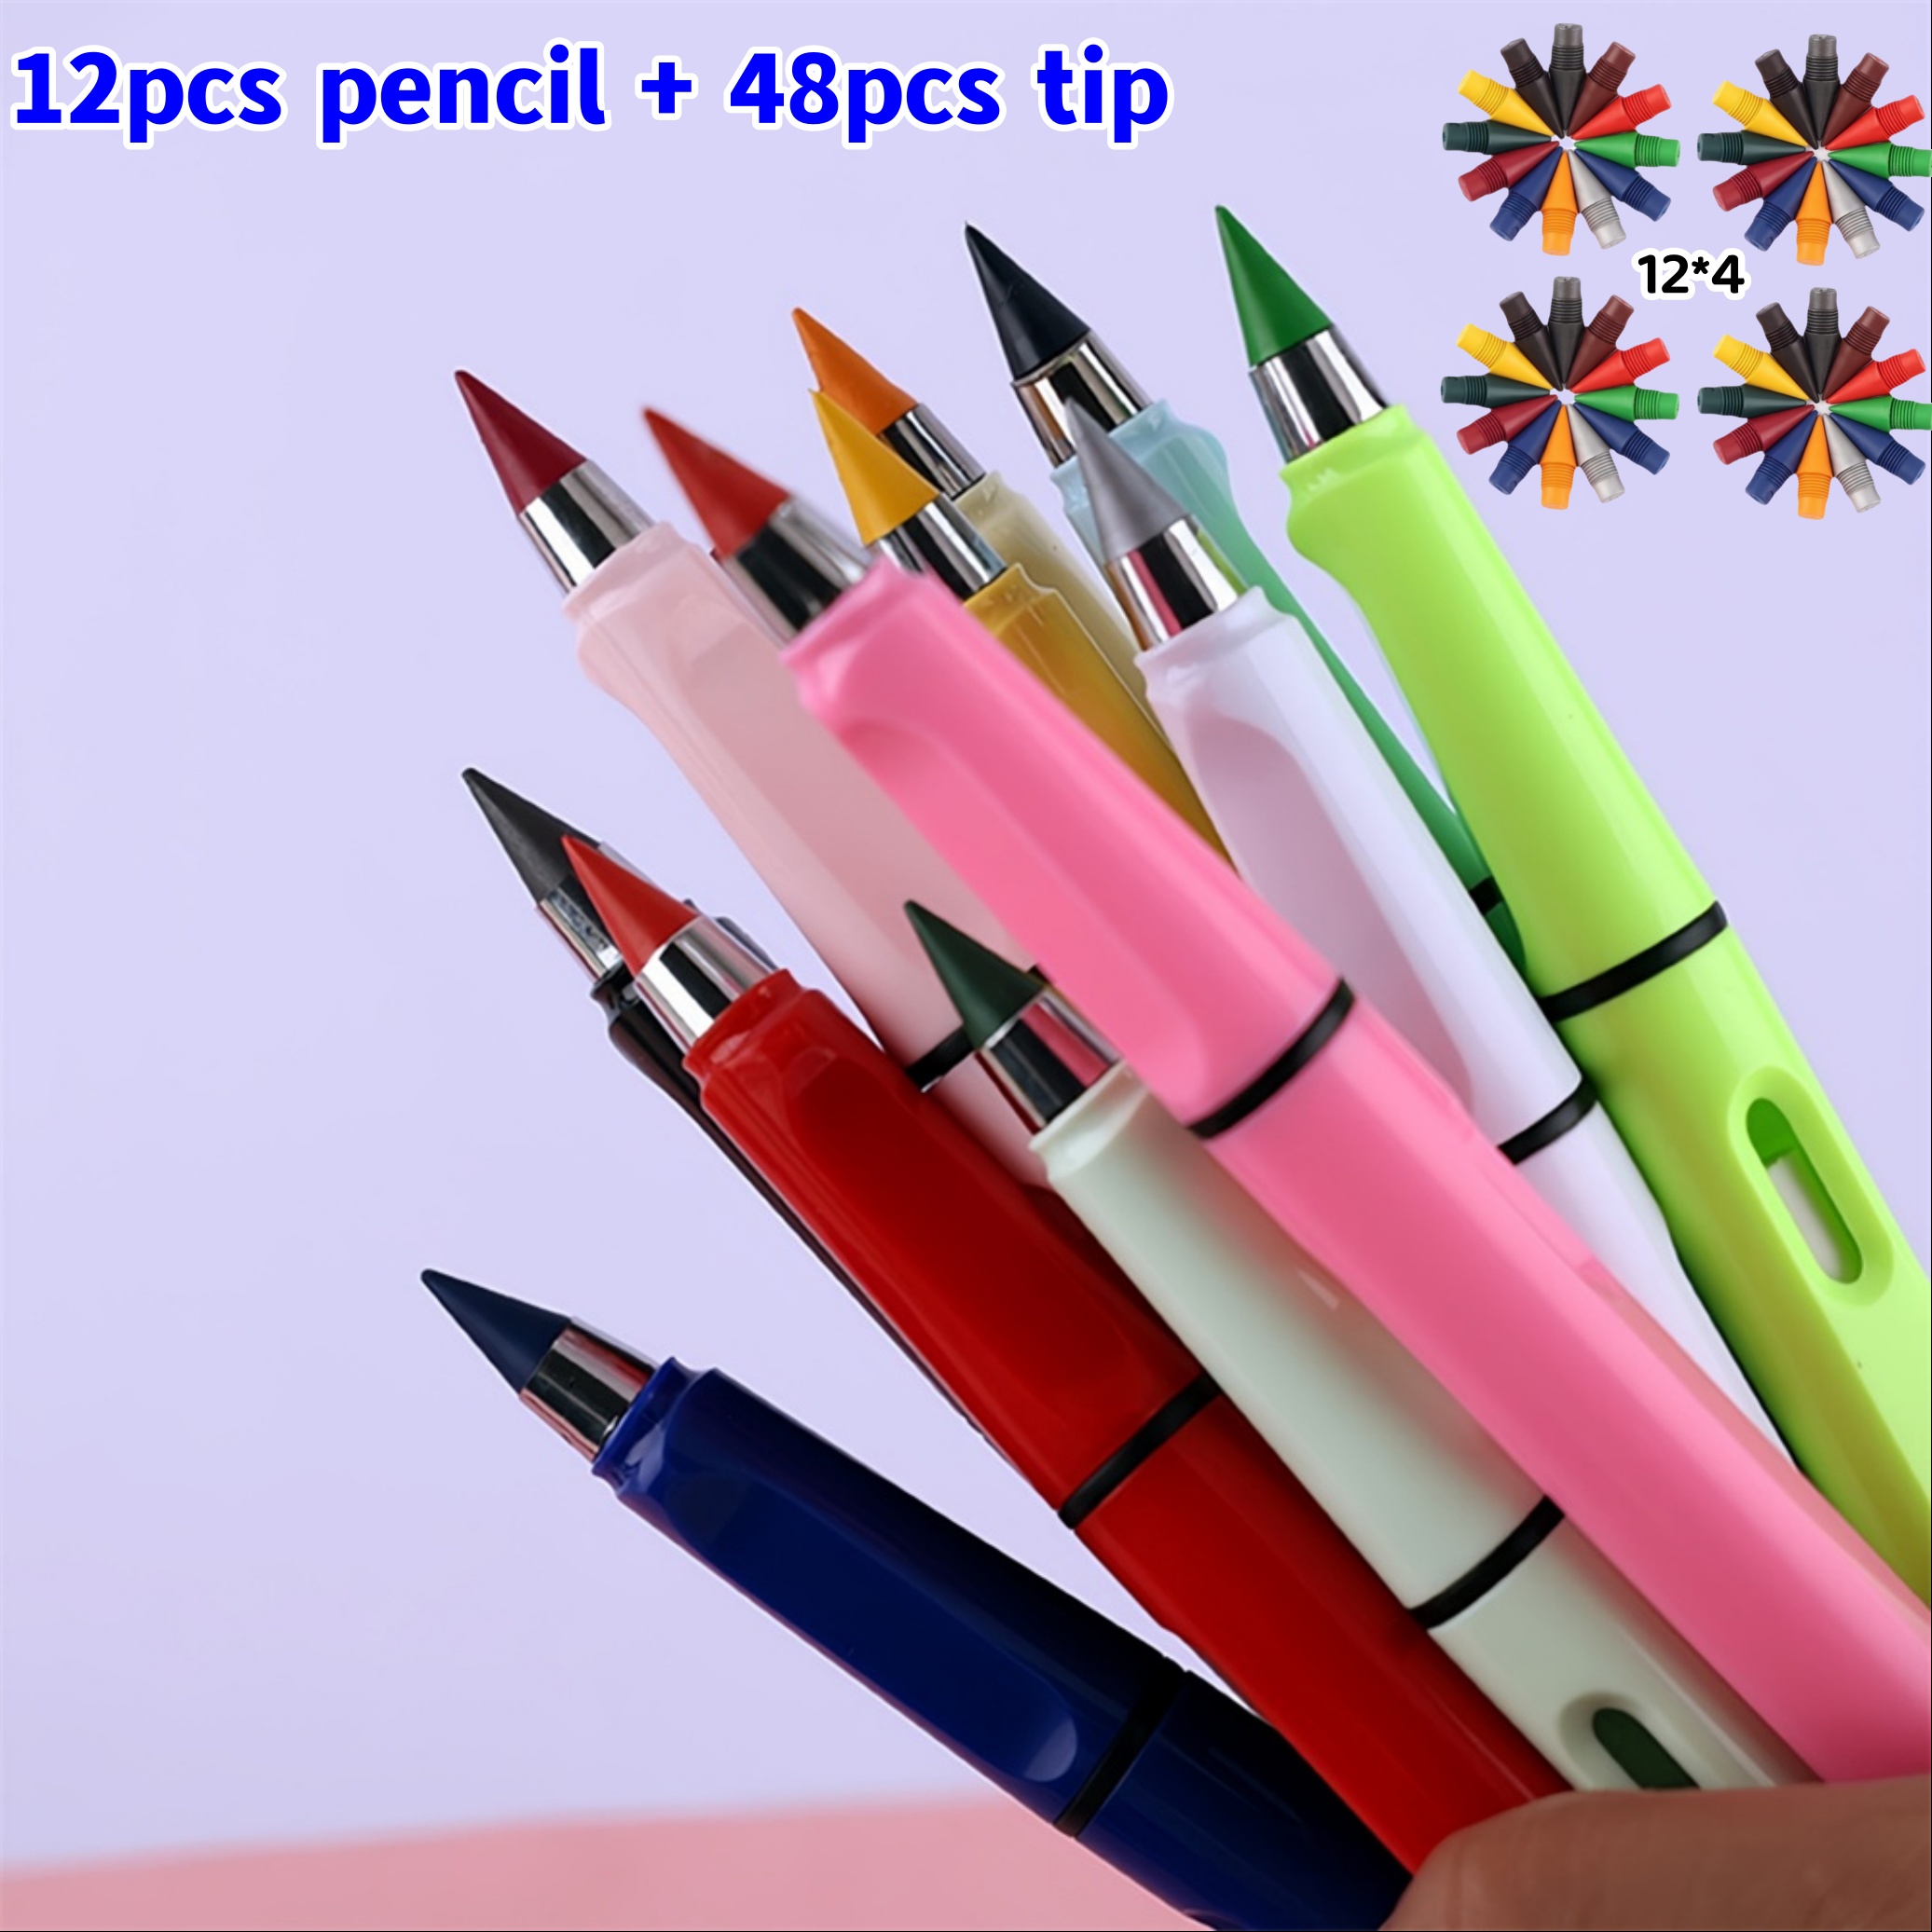 

12pcs Pencil With 48pcs Colored Replaceable Tip, 60pcs/set - Long Lasting Writing Infinity Pencil, Never Sharpen Everlasting Inkless Pencil For Sketch, Drawing, School Supplies Eternal Pencil